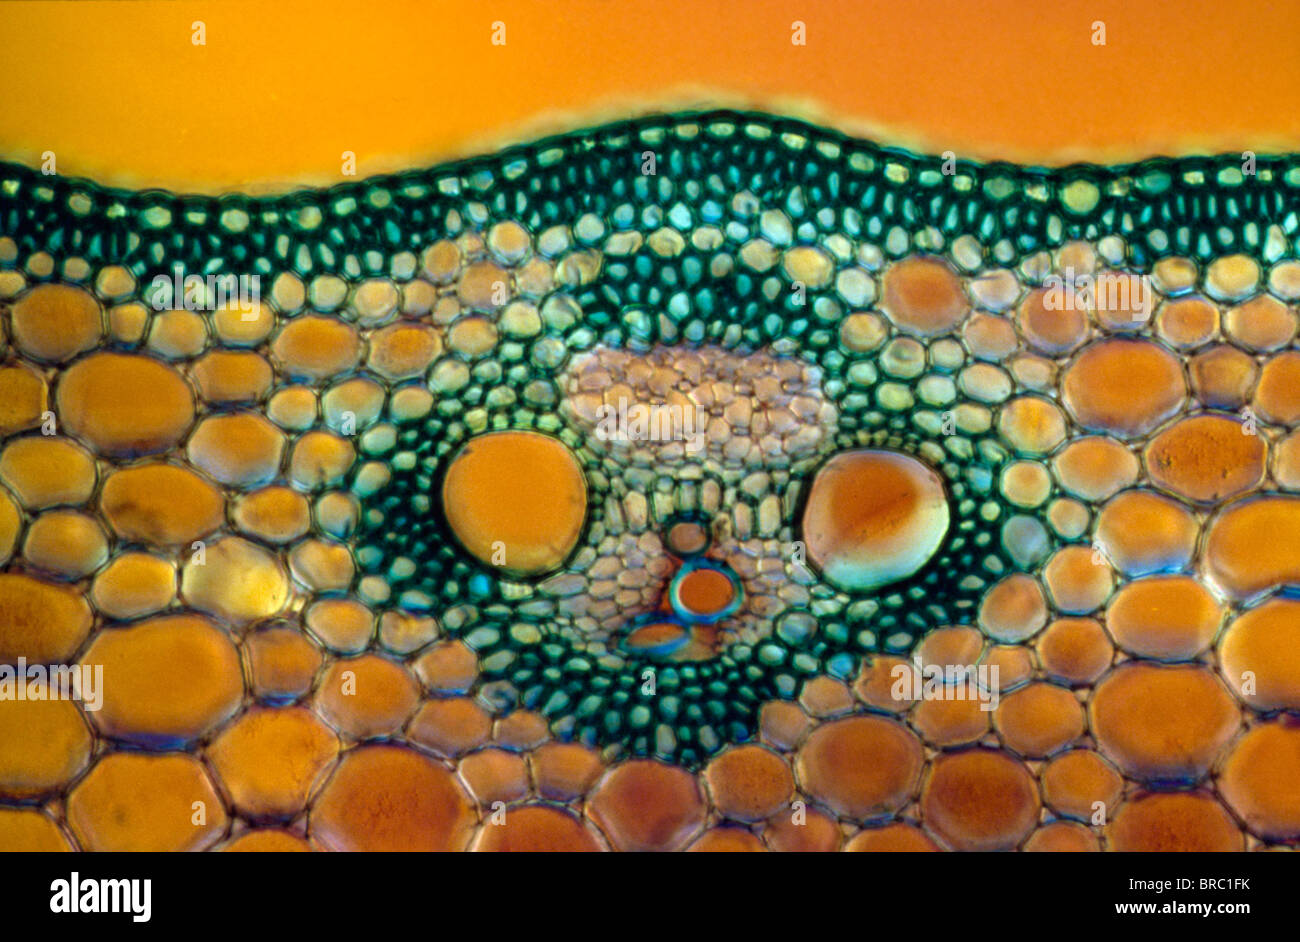 Light Micrograph (LM) of transverse section of a Maize stem showing vascular bundle, cortex and epidermis, magnification x600 Stock Photo